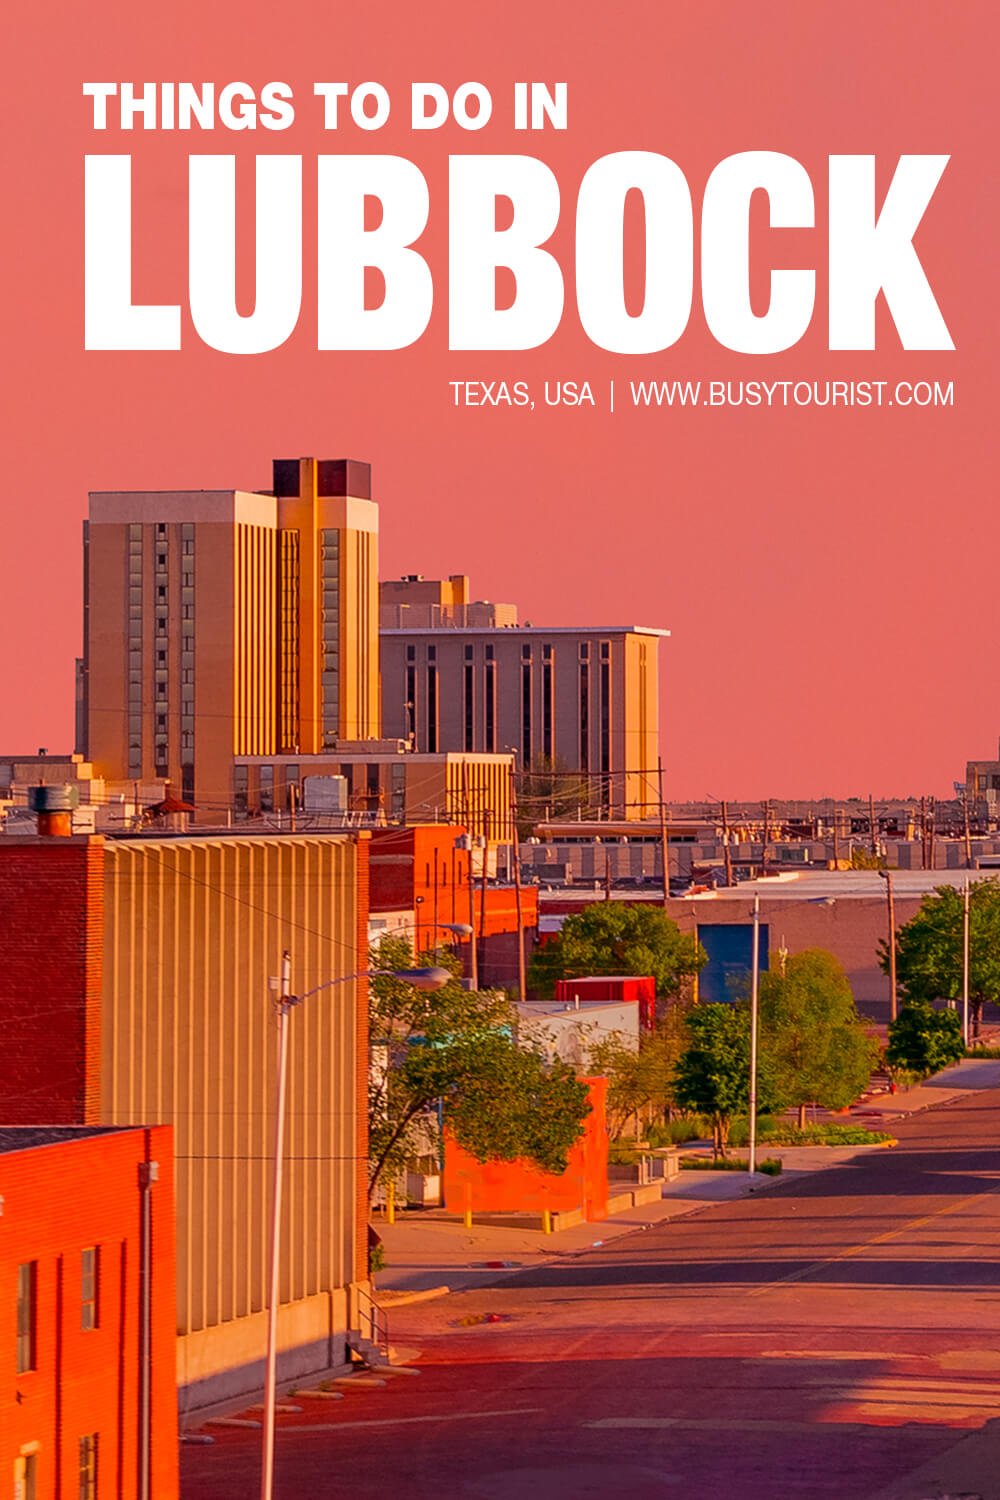 22 Best & Fun Things To Do In Lubbock (TX) Attractions & Activities